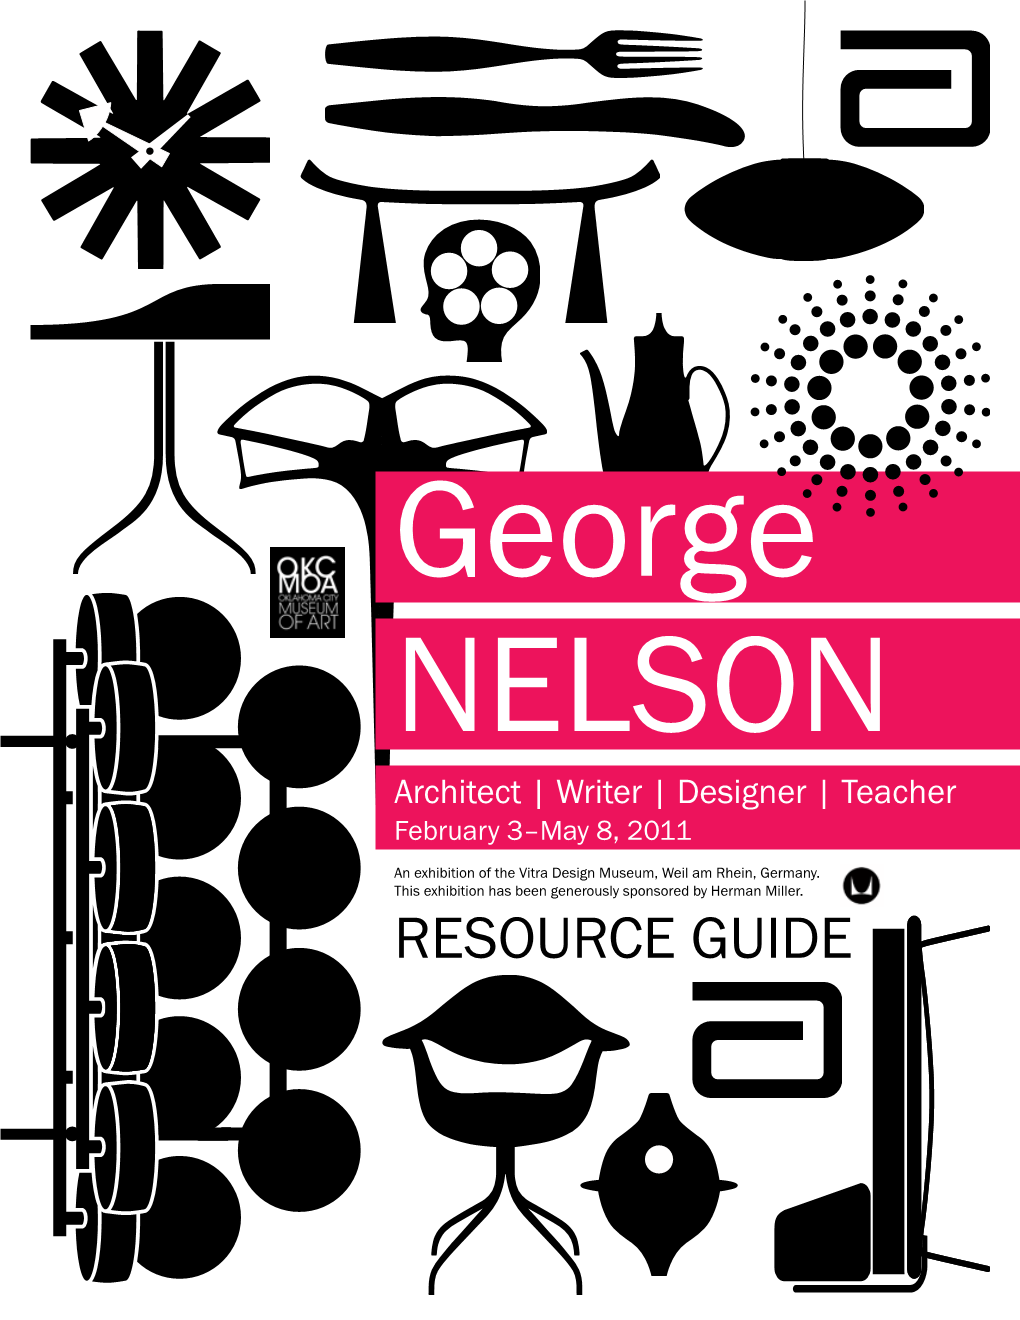 George Nelson Resource Guide